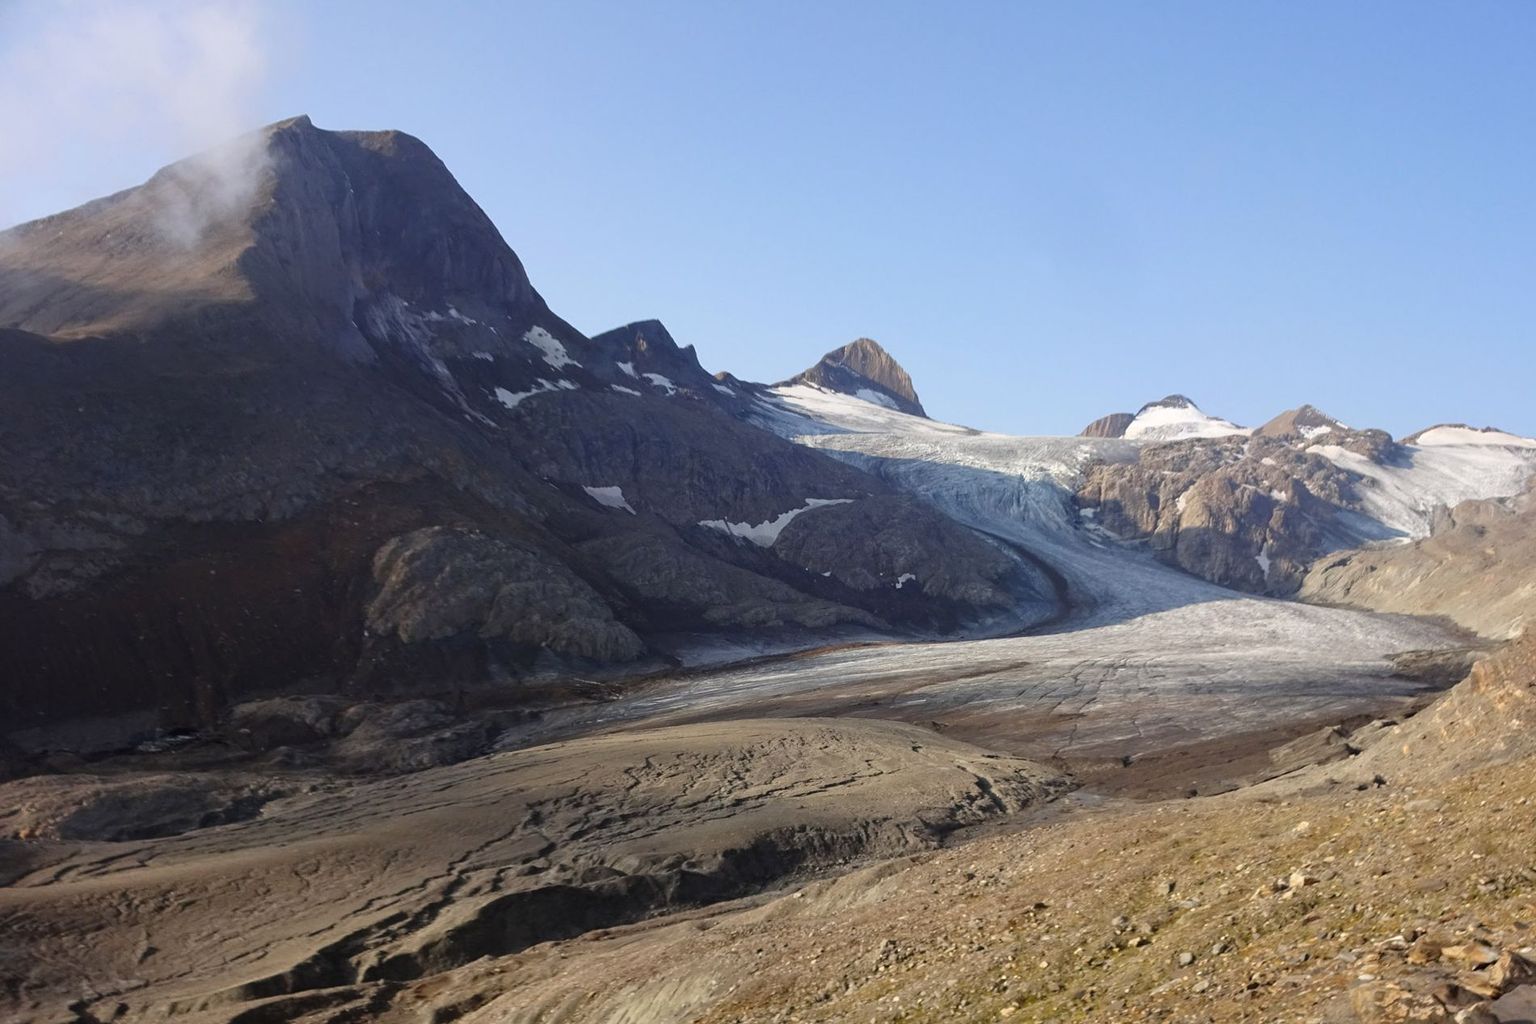 For years, the Gries Glacier (VS) has been losing mass faster than almost any other glacier in Switzerland. Its tongue has become thin and dirty, which further accelerates the melting.